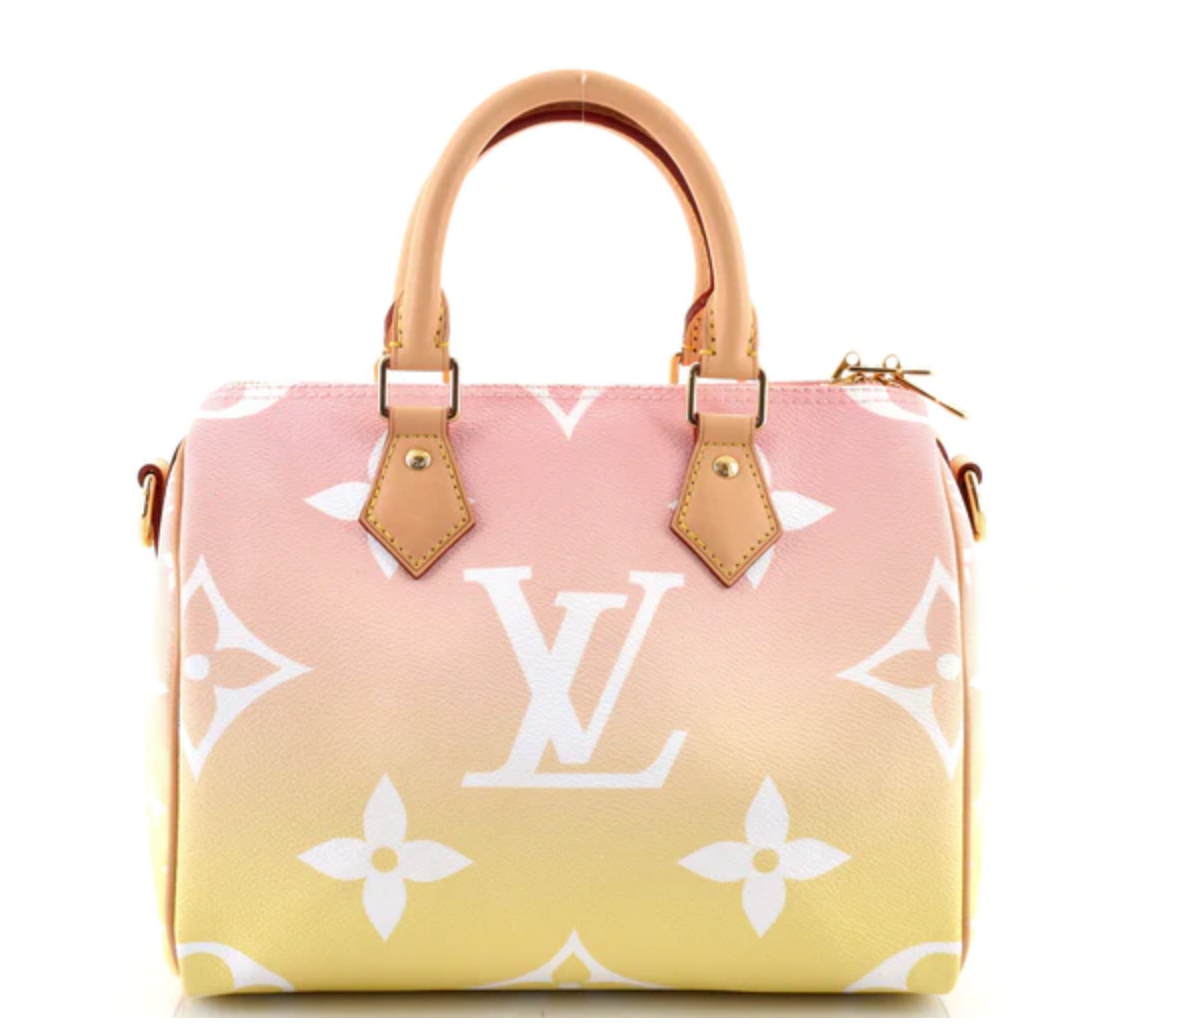 (LIKE NEW) Louis Vuitton Giant Monogram Speedy 25 Bandolier Bag By the Pool Collection 011123